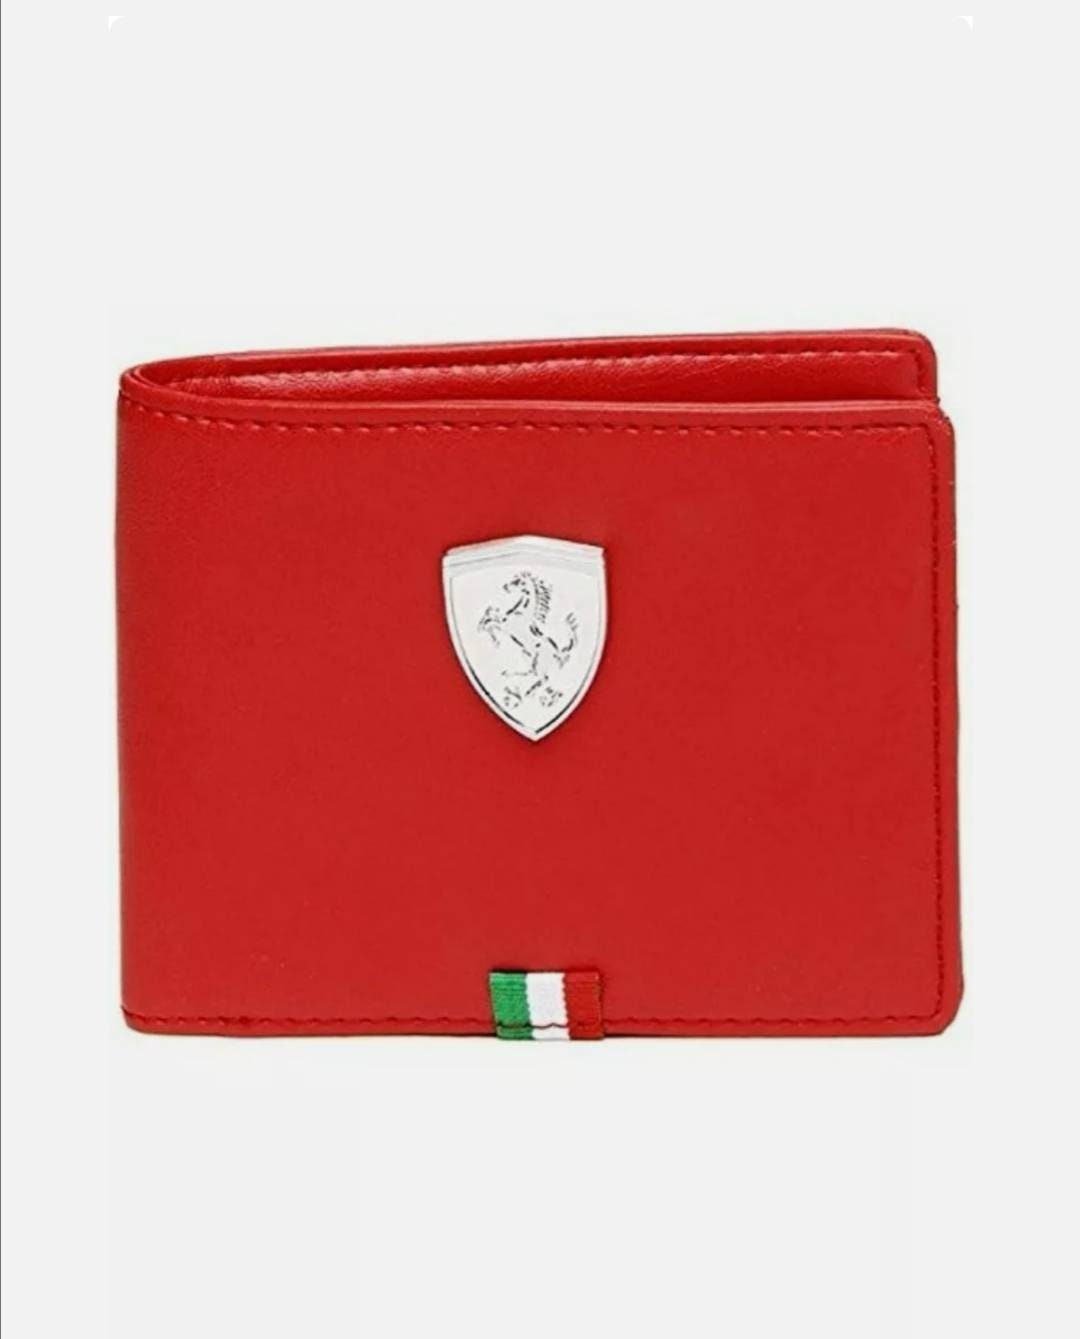 Brand New Authentic Ferrari Leather Wallet by PUMA Red Bi - Etsy